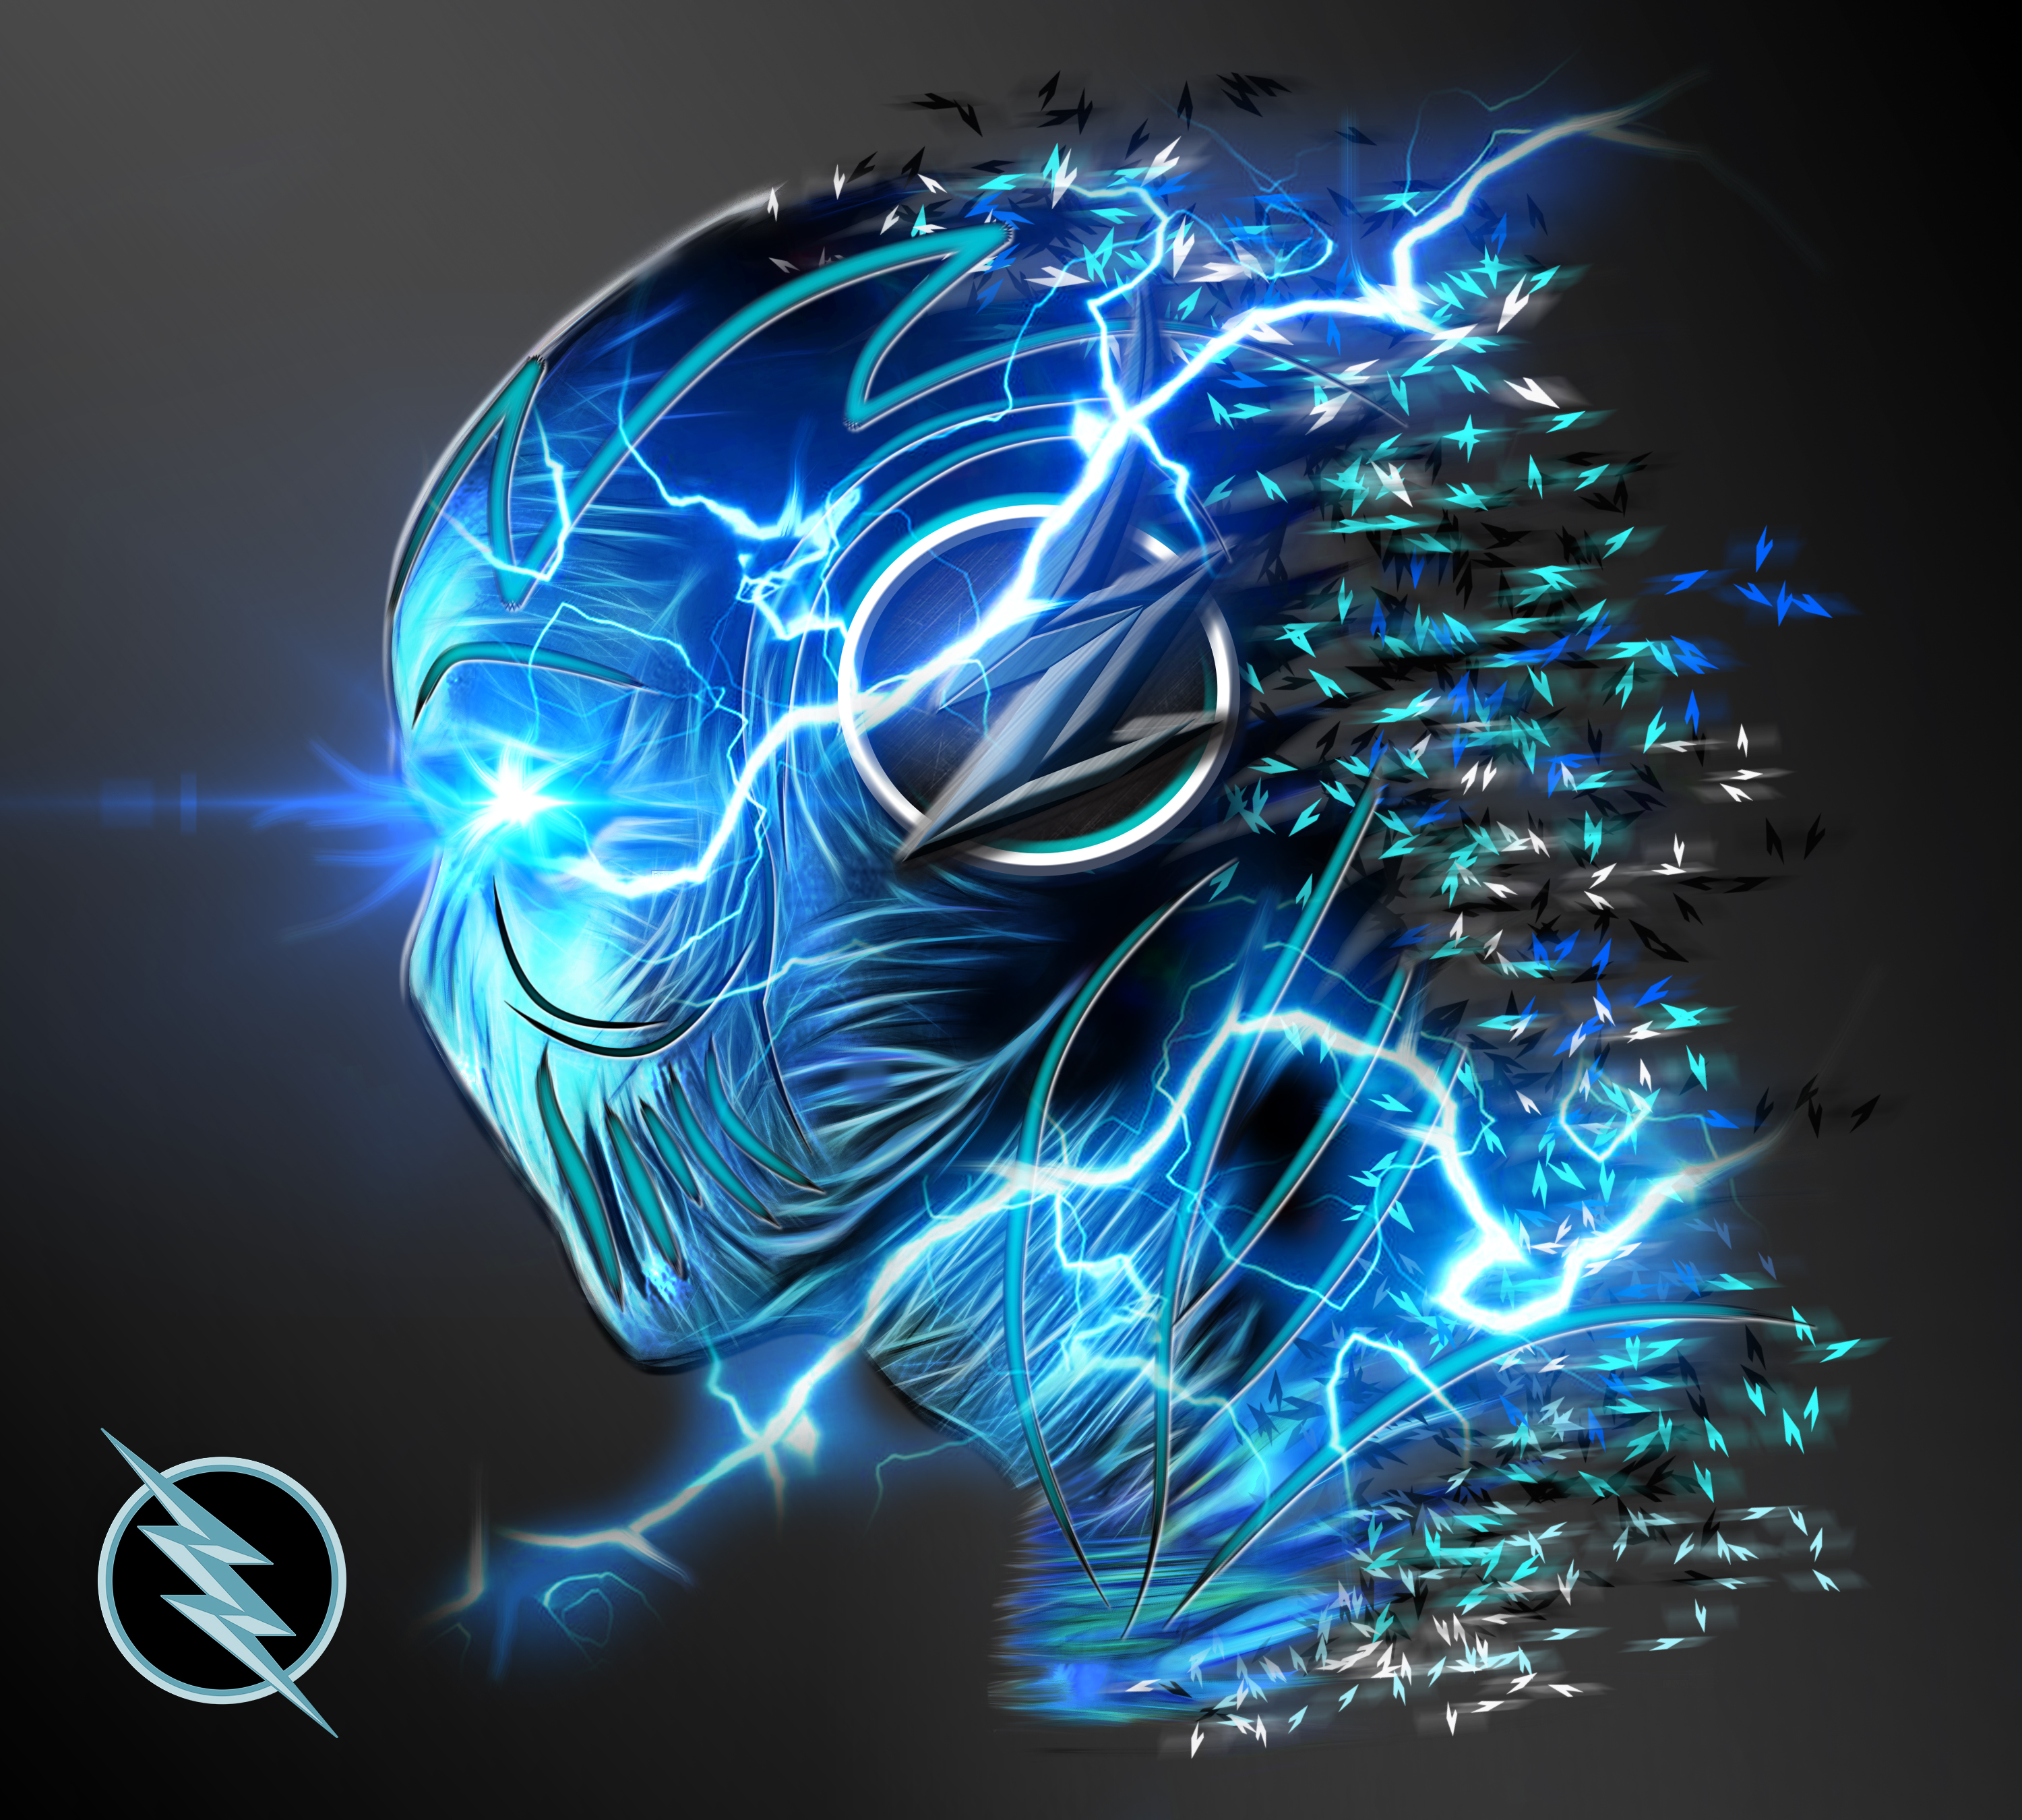 Zoom from CW's The Flash by ultrayady on DeviantArt